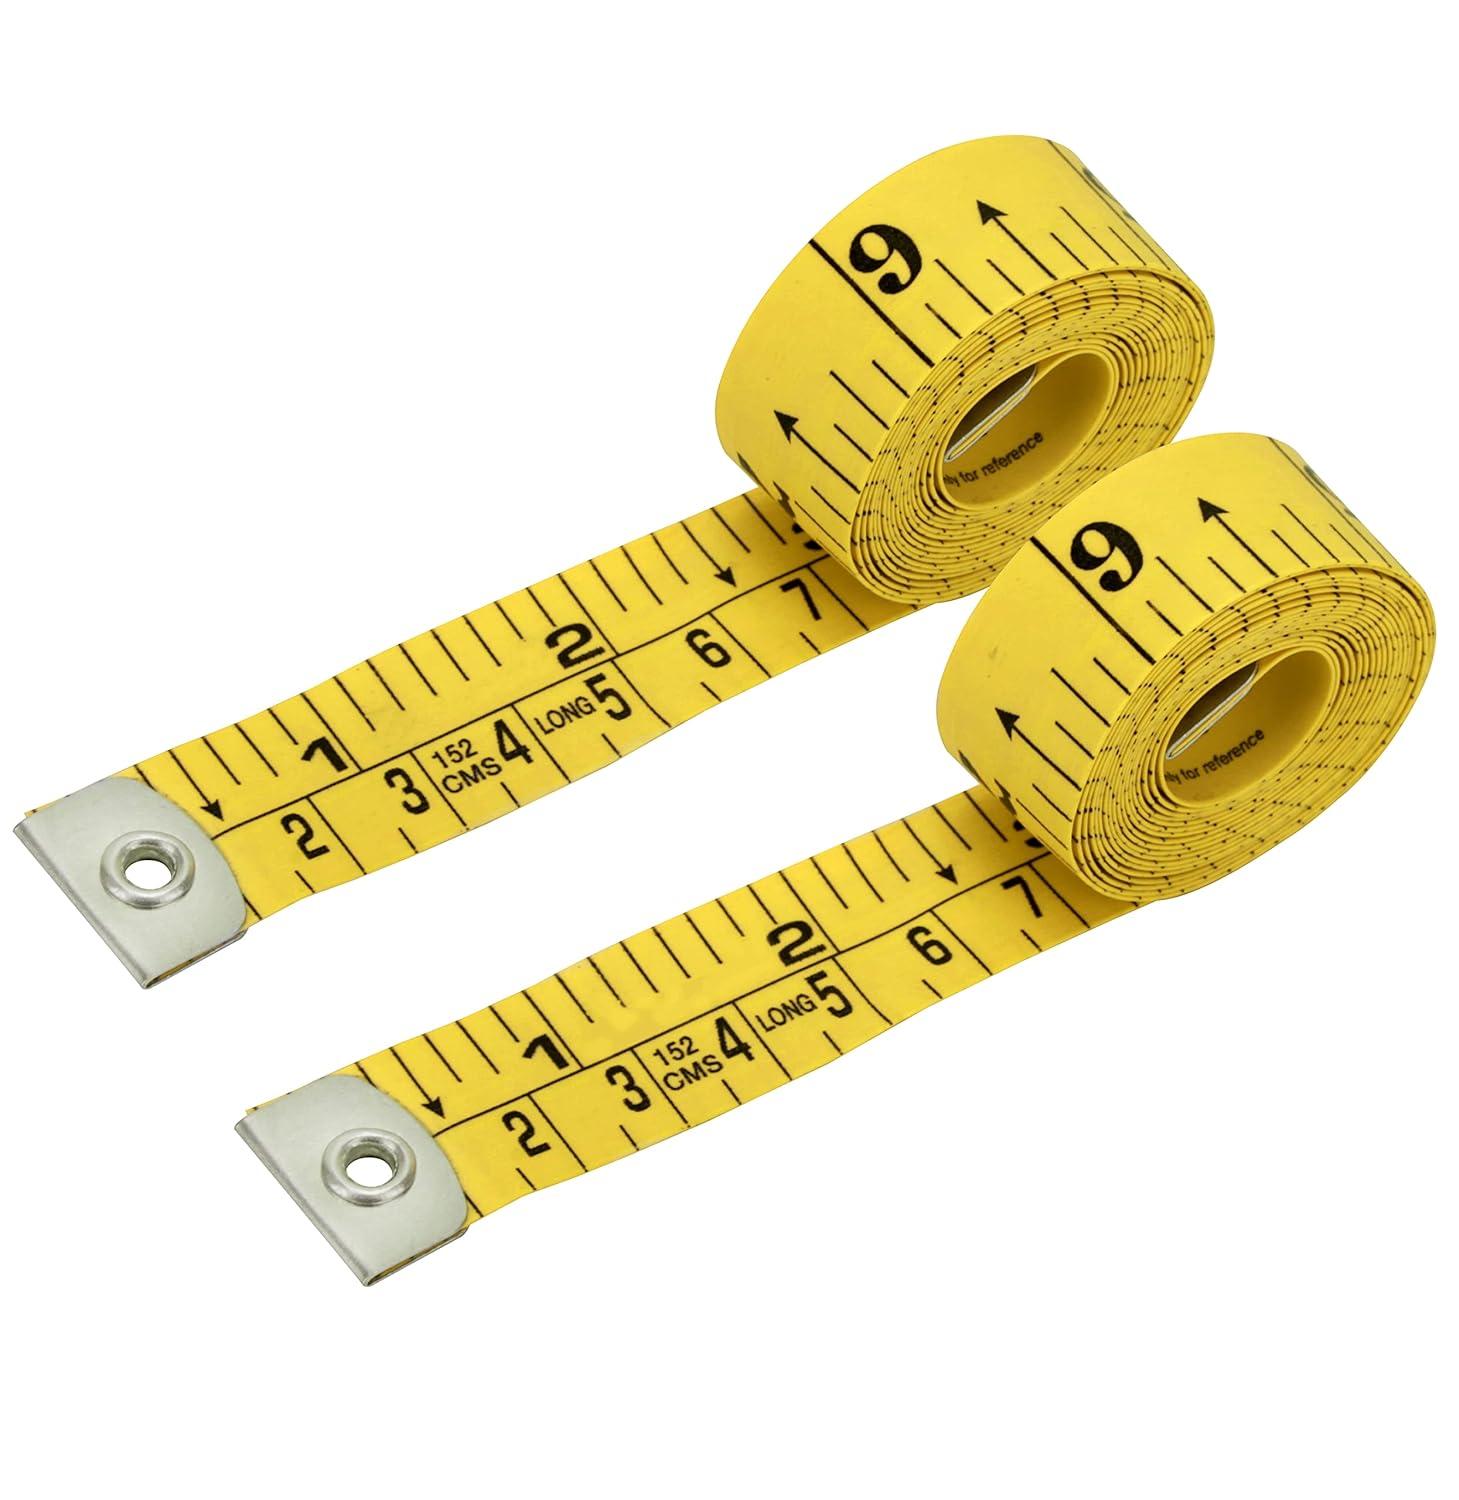 Sewing Tape Measures, 2 Pack 60-Inch Dual Scale Cloth Sewing Tape Measure,  Soft Tape Measure,Tape Measuring for Body